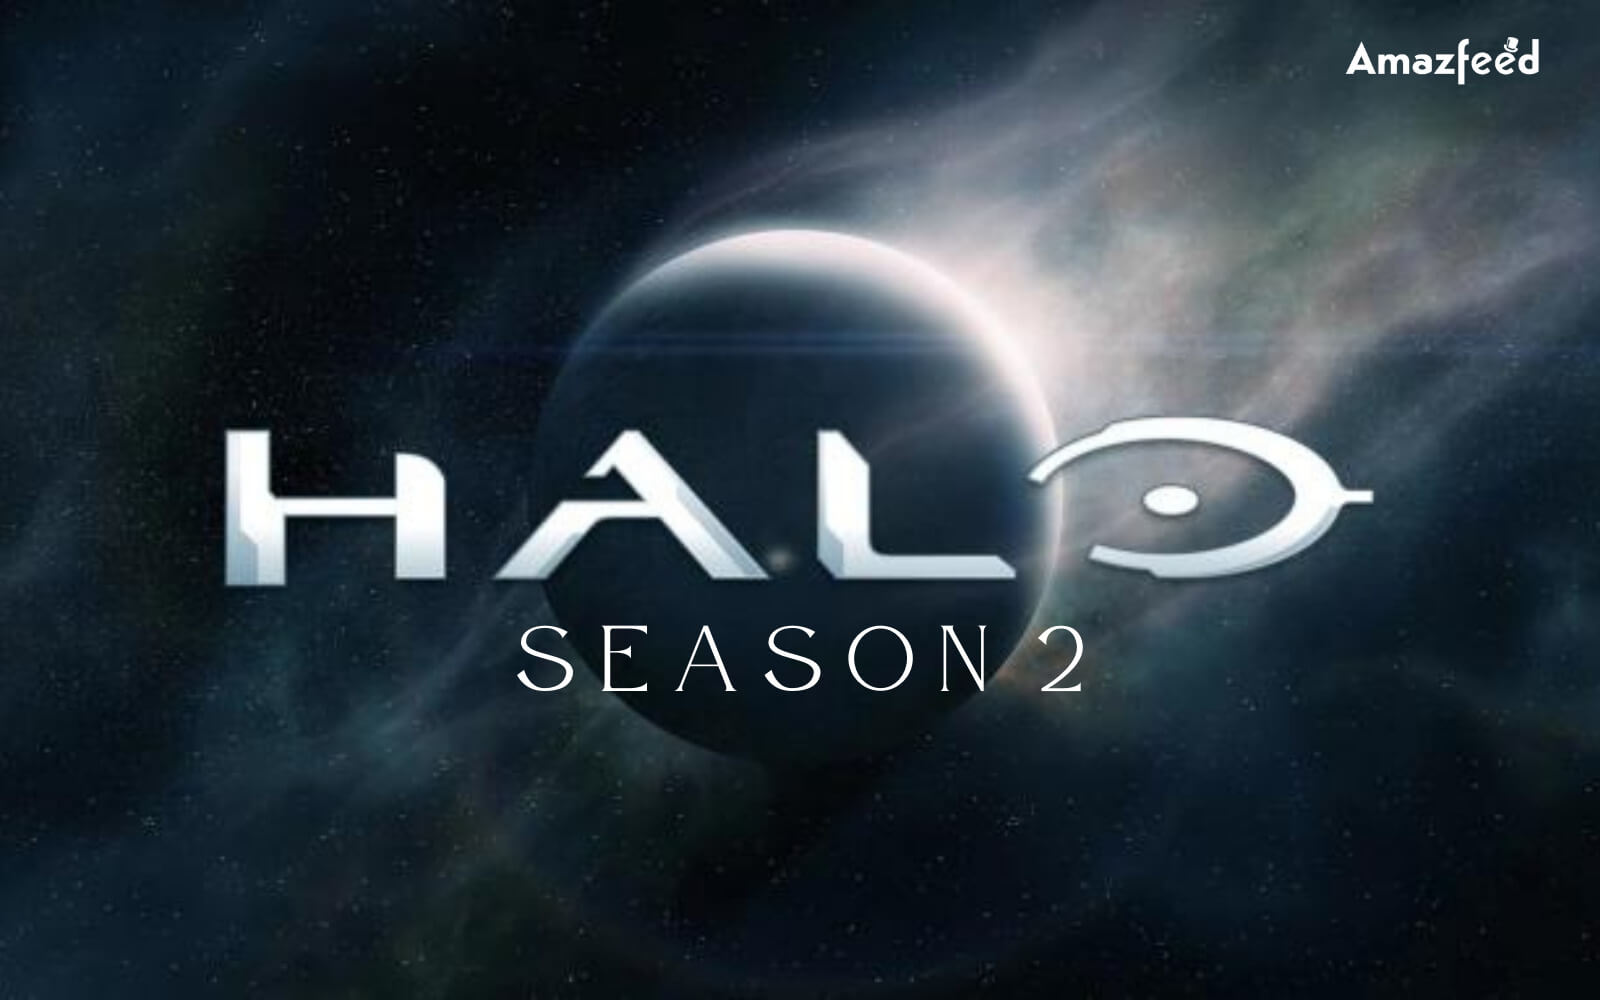 Halo season 2 release date, cast, plot, trailer, and news